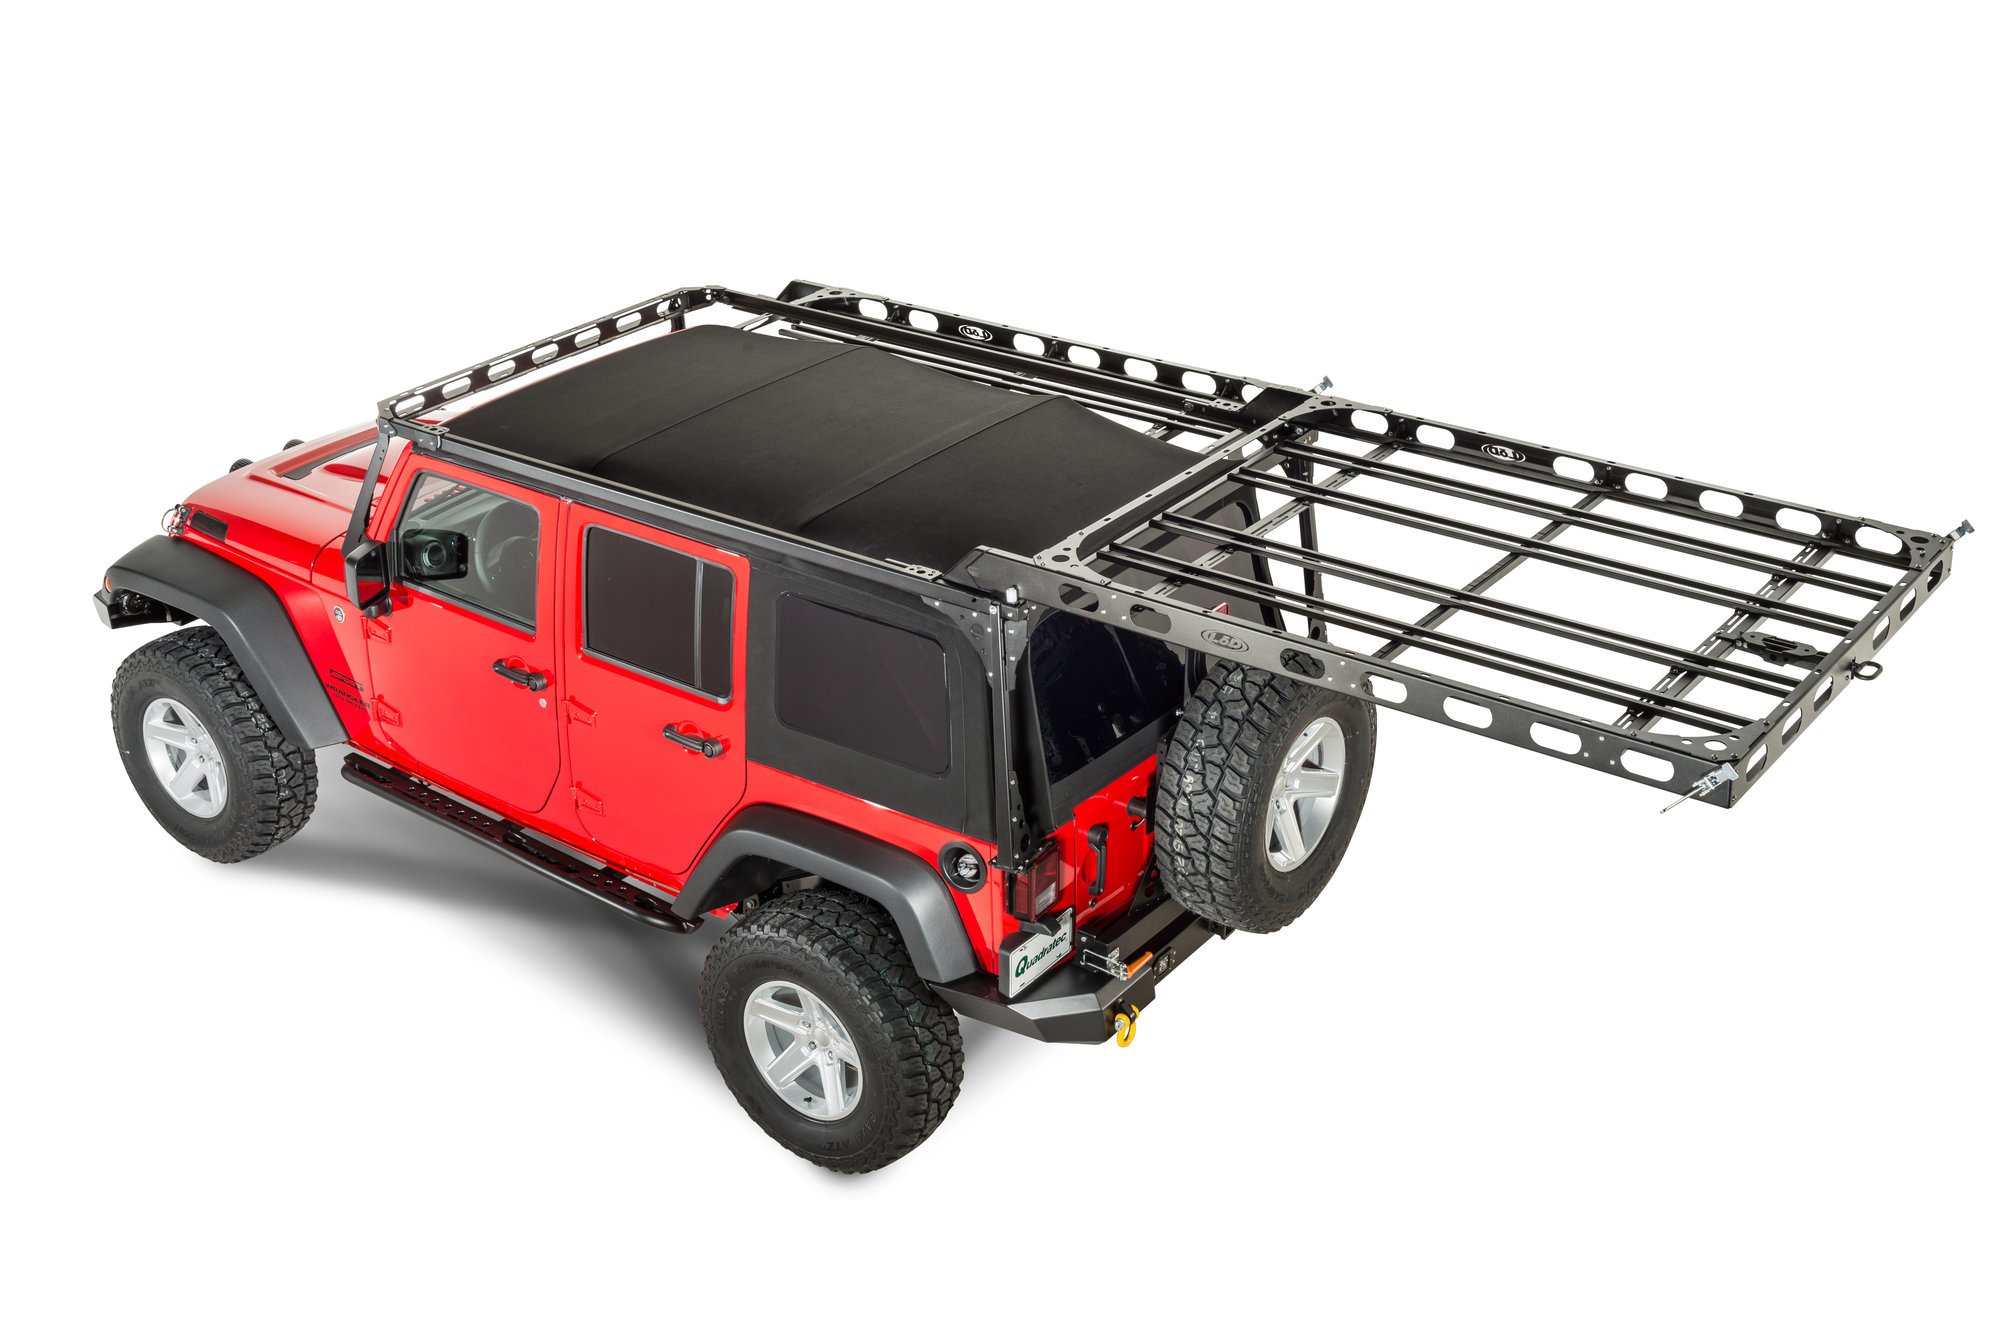 LoD Easy Access Roof Rack System for 07-18 Jeep Wrangler Unlimited JK |  Quadratec